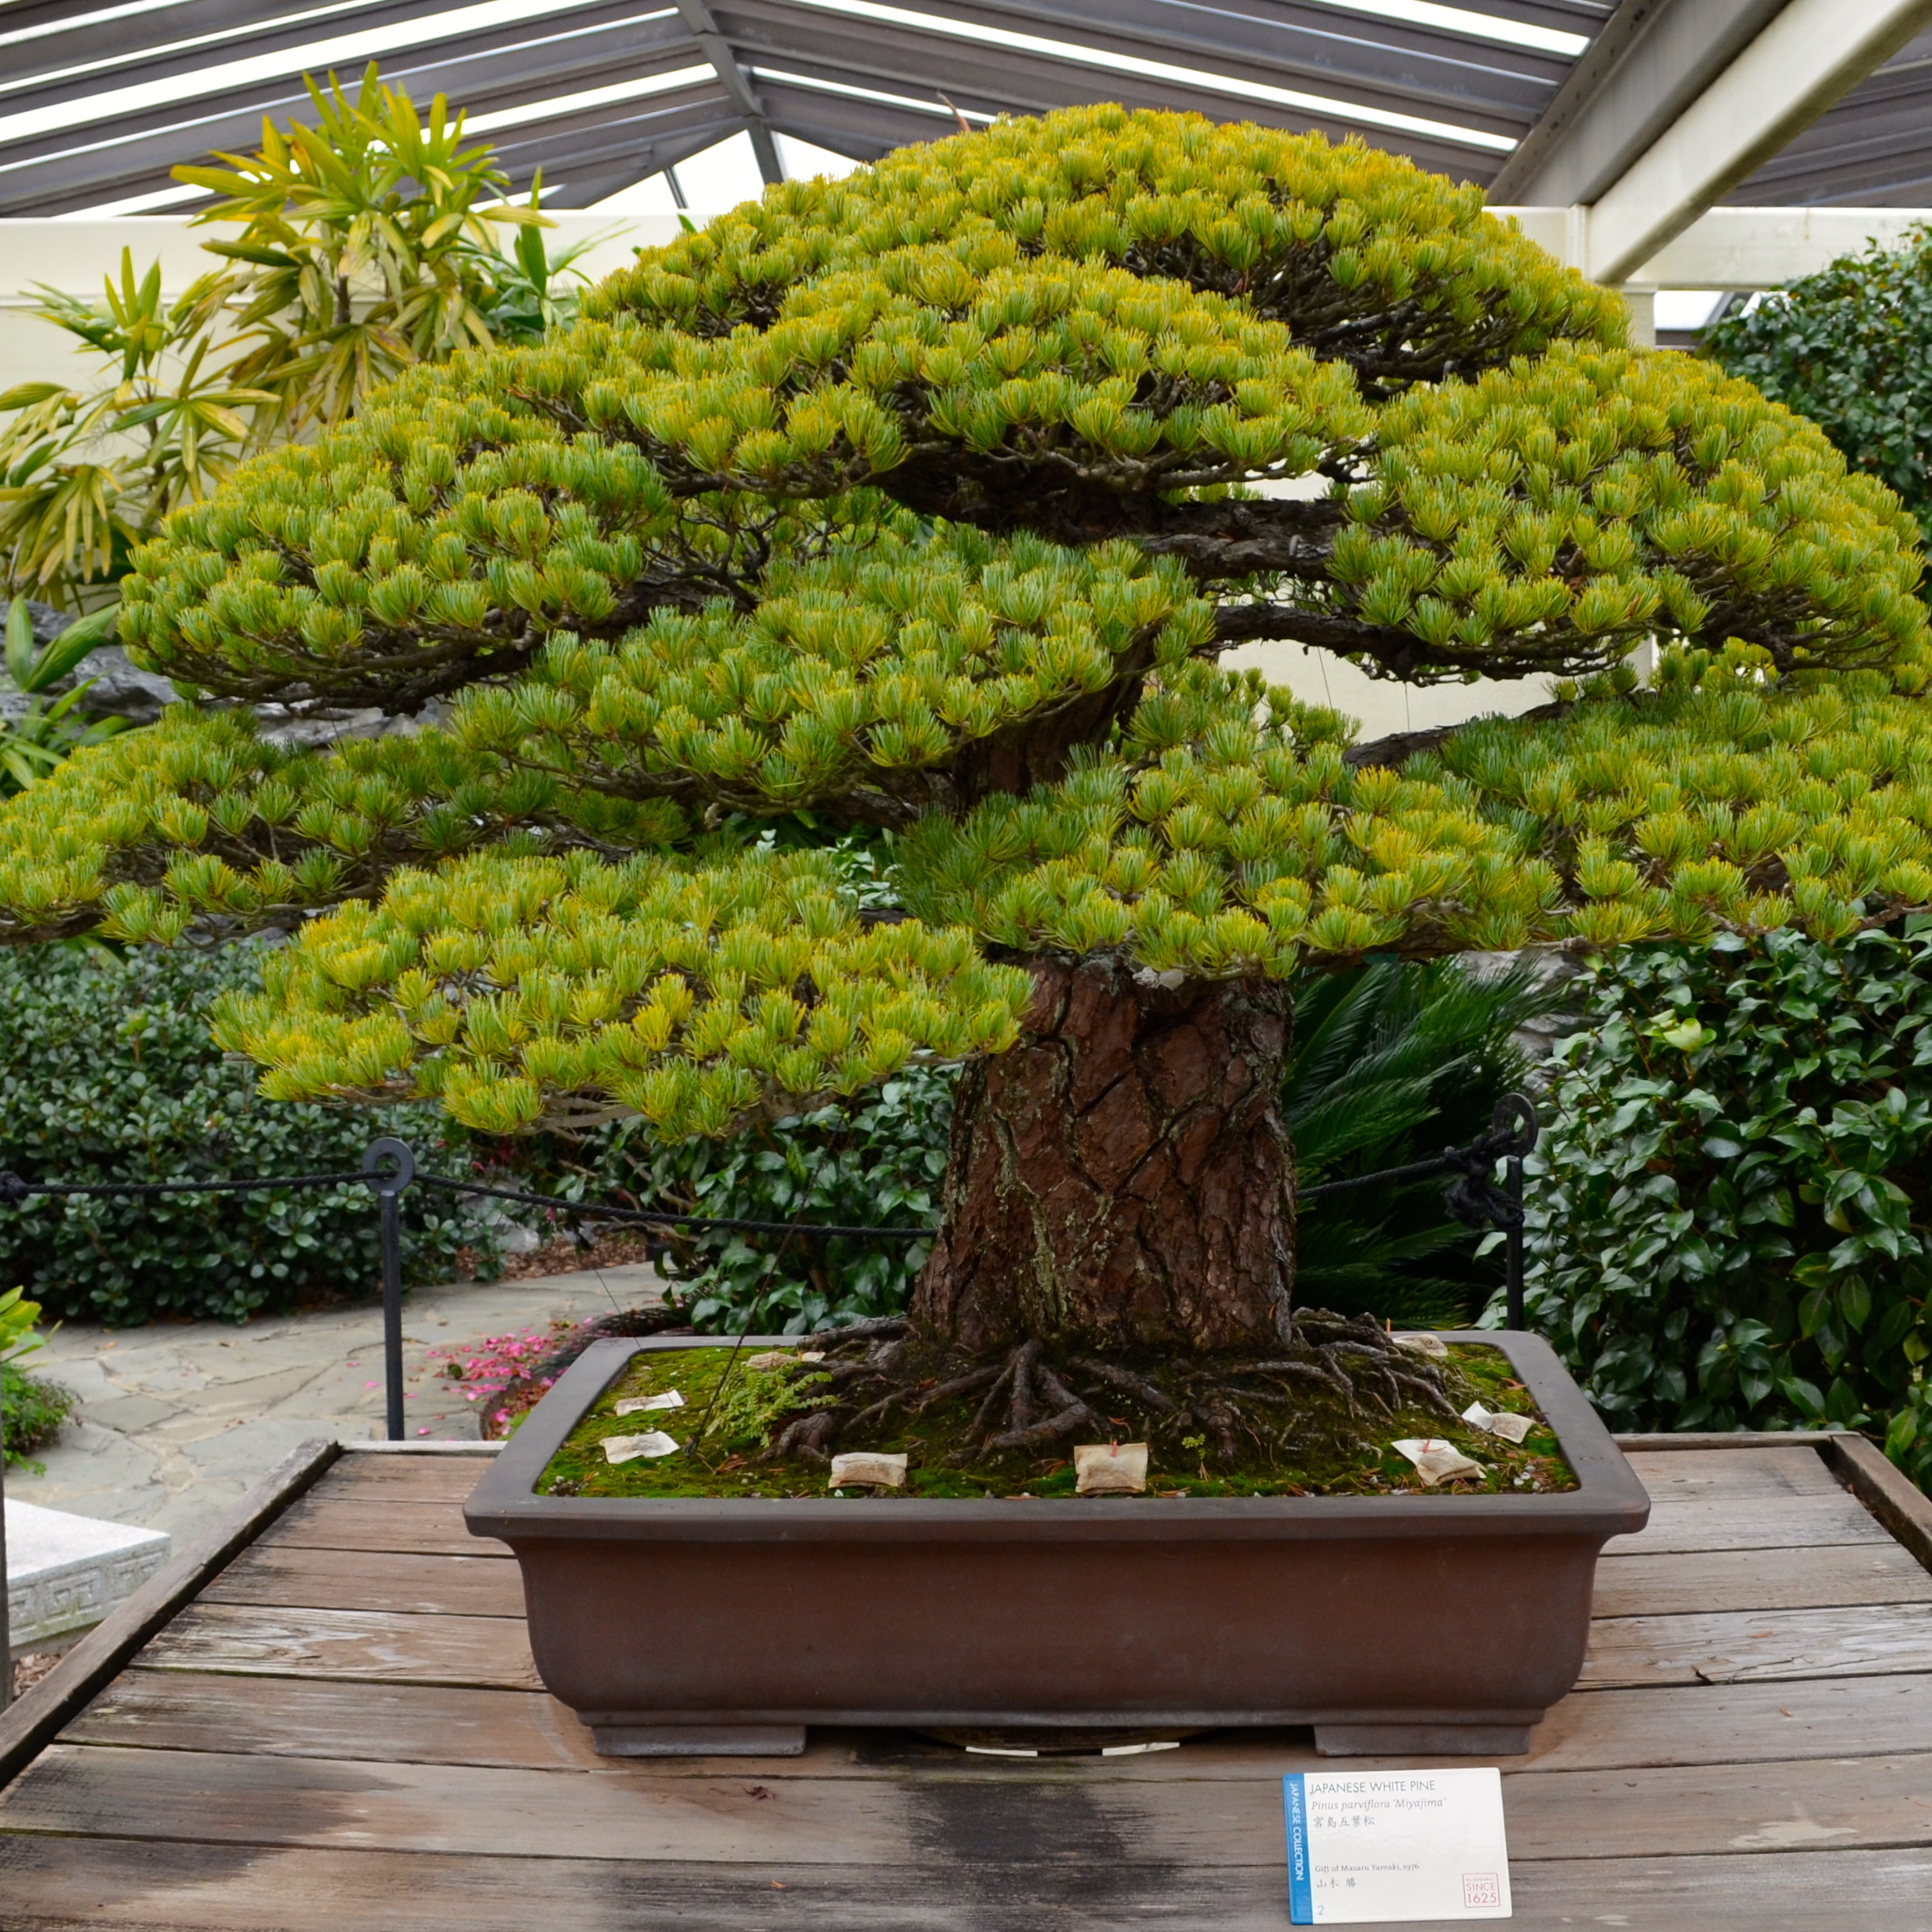 A VISIT WITH A 389 YEAR OLD BONSAI TREE